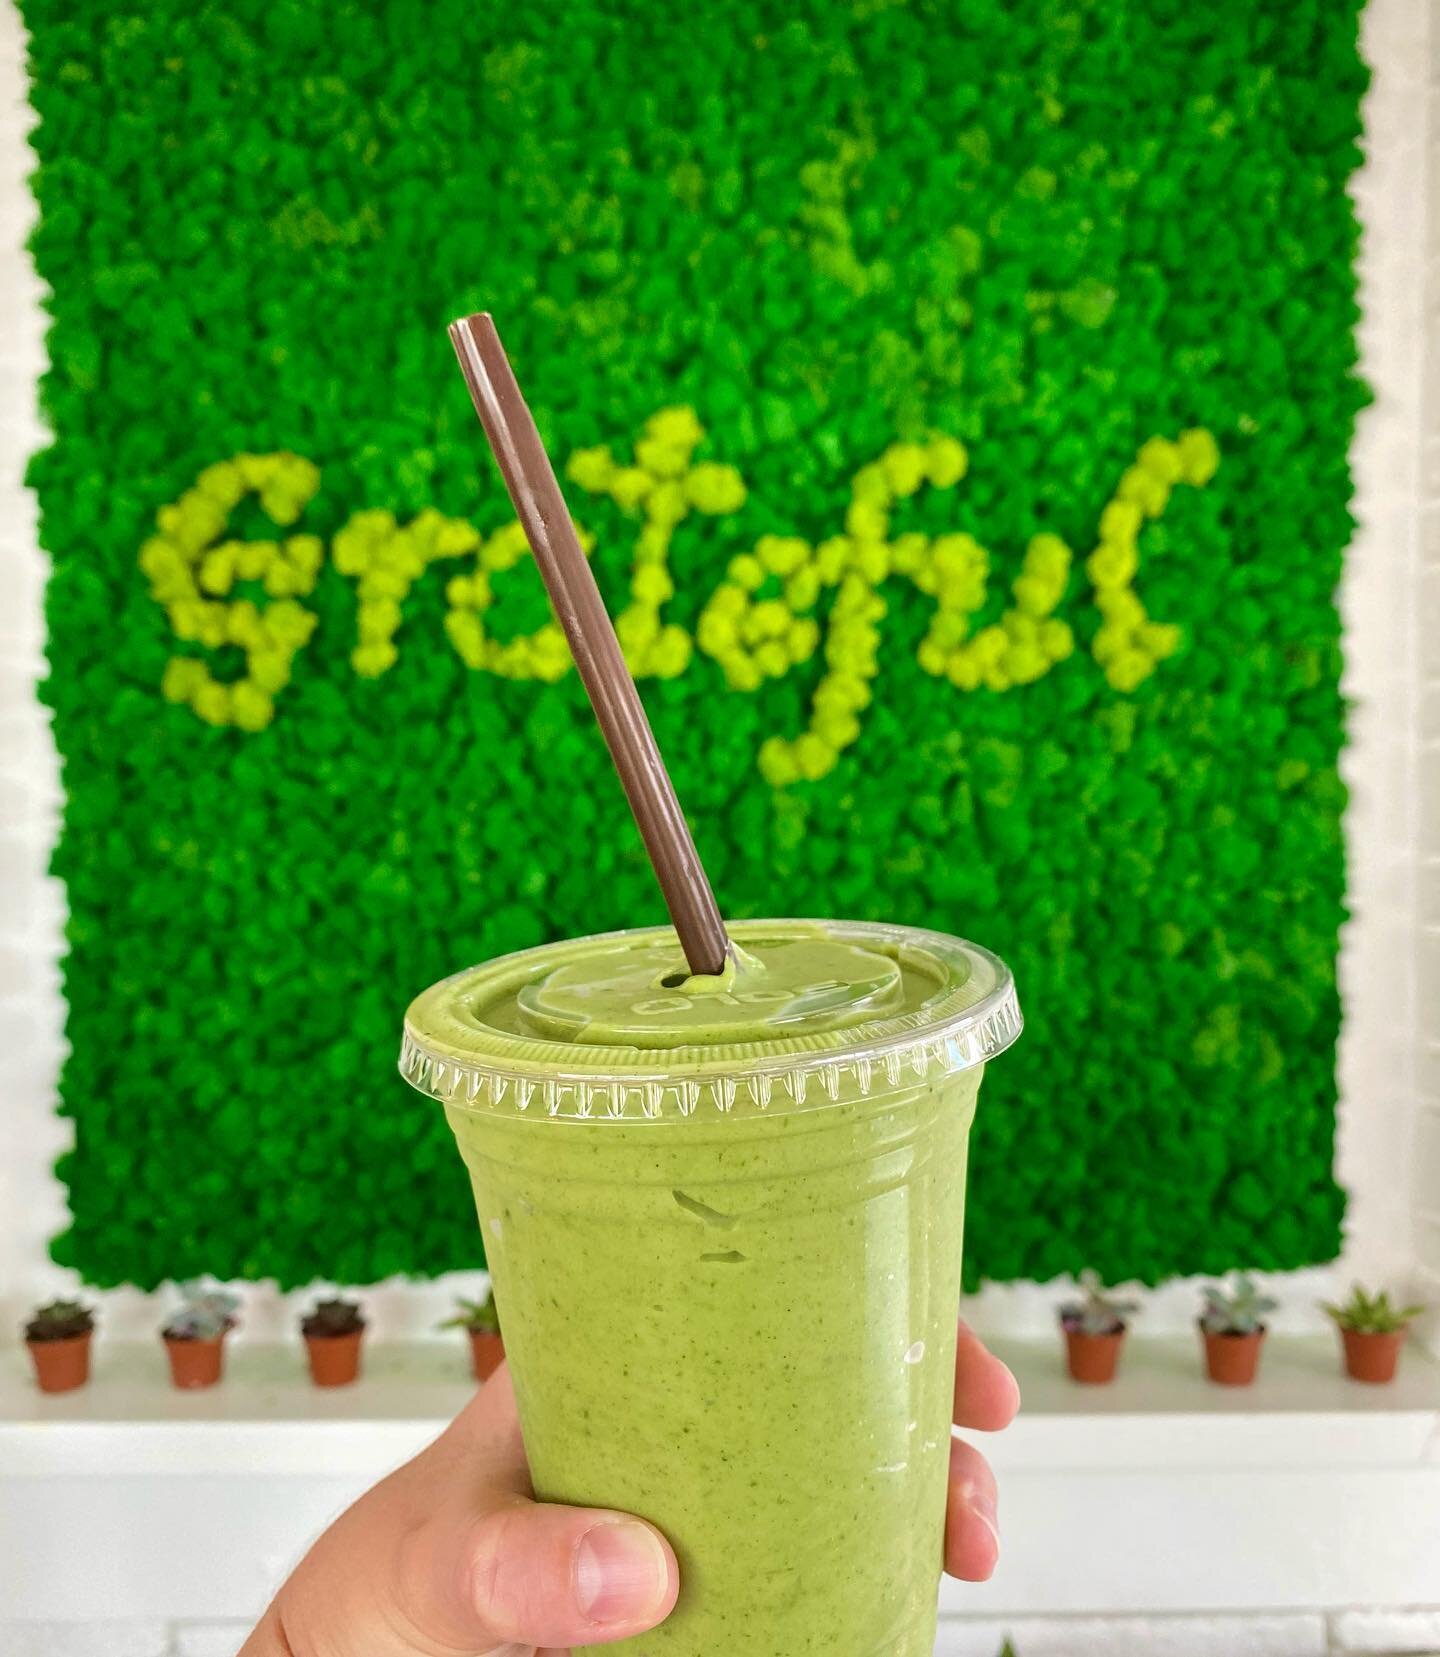 Check out our neighbor @gratefuljuicebar 💚
They make delicious superfood smoothies and juices!!! 😋
.
.
.
#northbeachvillage #northbeachvillageresort #villagelife #fortlauderdale #fortlauderdalebeach #grateful #gratefuljuice #fortlauderdalefoodies #